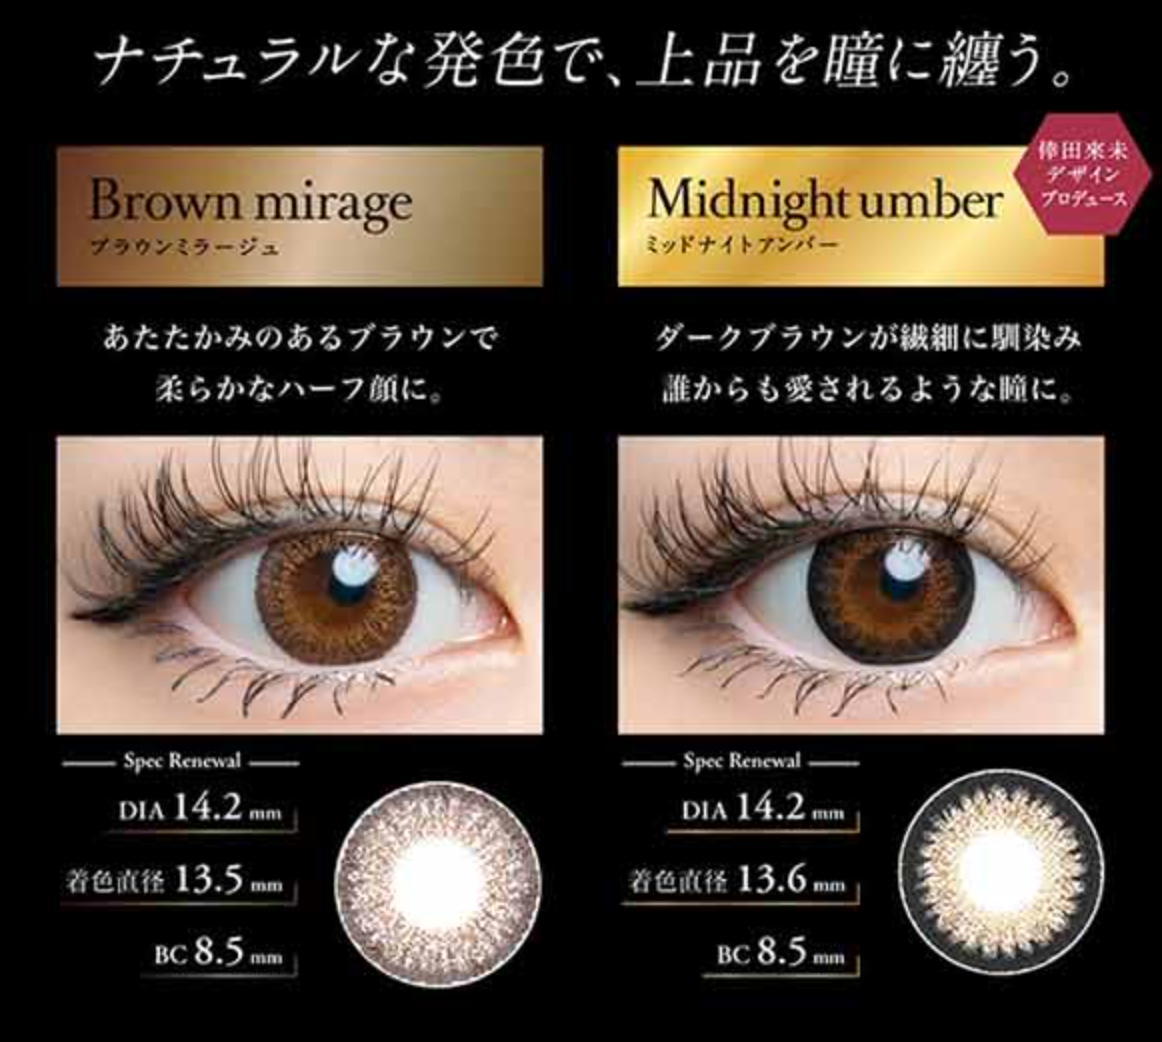 [Order Price] LOVEIL 1-DAY - NATURAL STYLE - MIDNIGHT UMBER Daily Disposable/10 Tablets